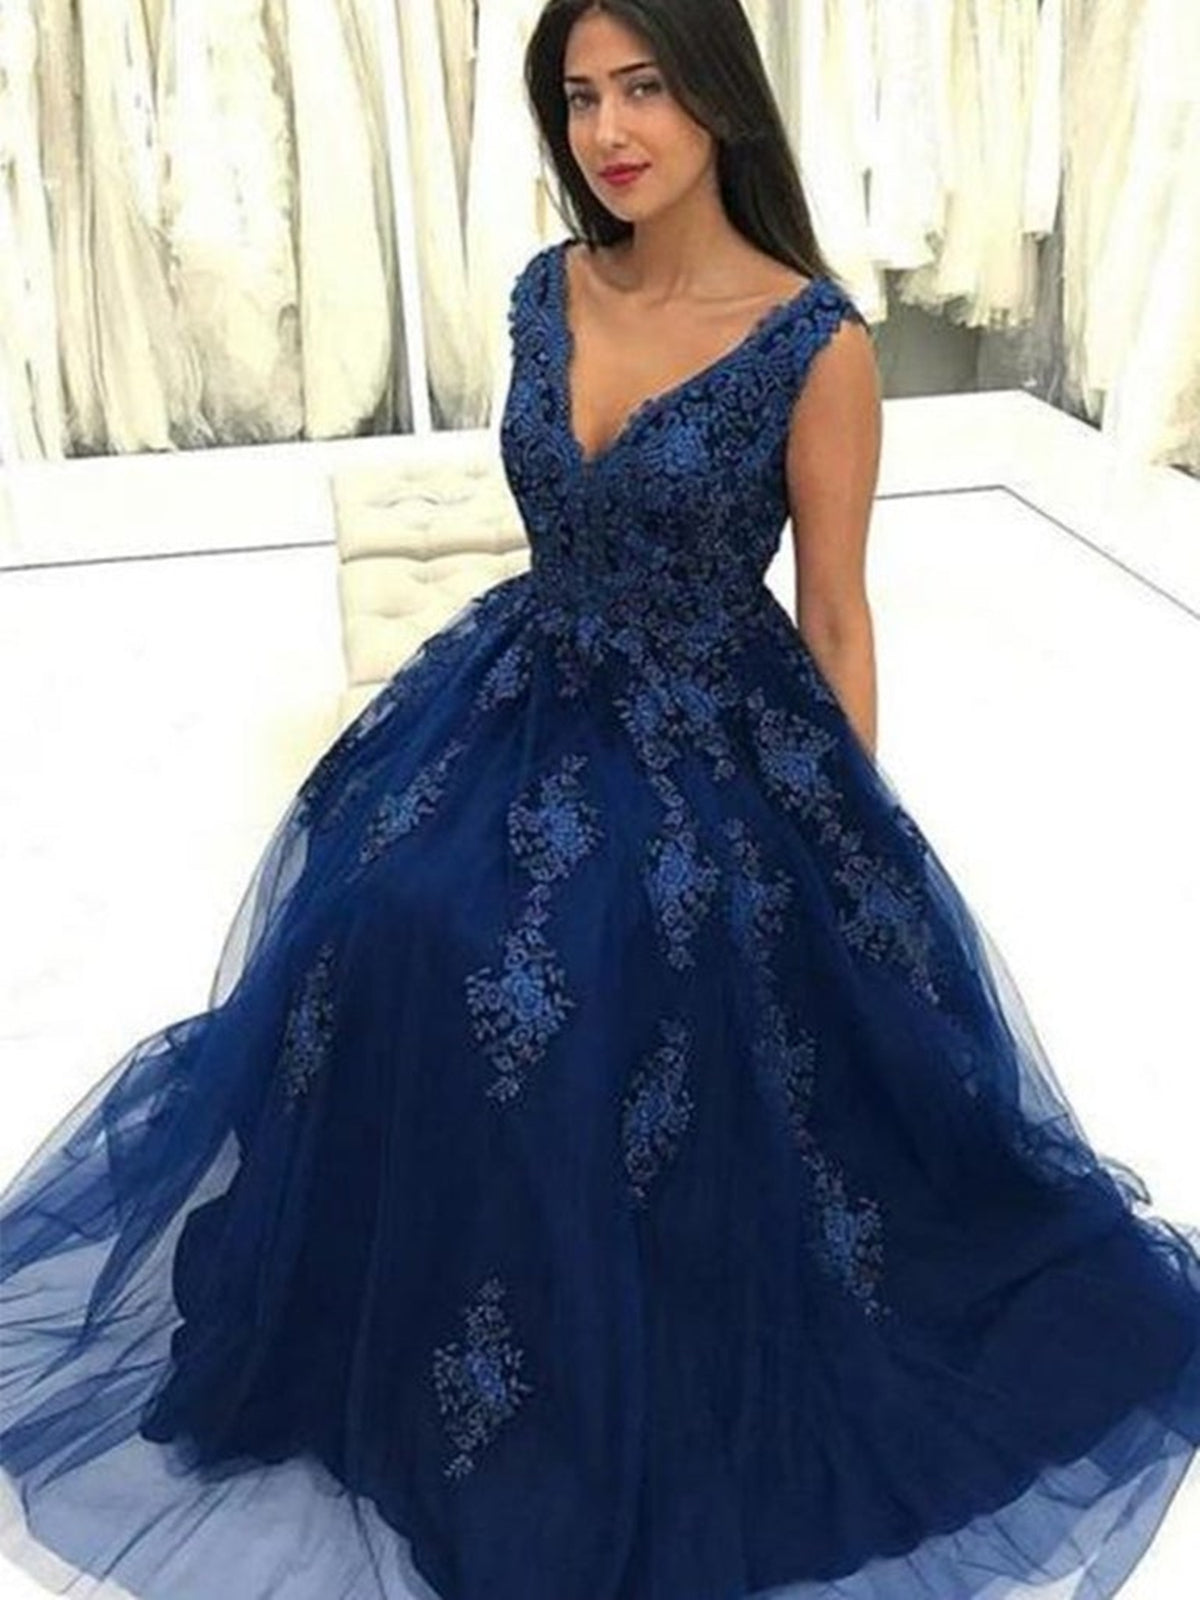 Navy Blue Lace Plus Size Prom Dresses For Special Occasion A Line V Neck Evening  Gowns Long Sleeves Floor Length Chiffon Formal Dress From 89,55 €